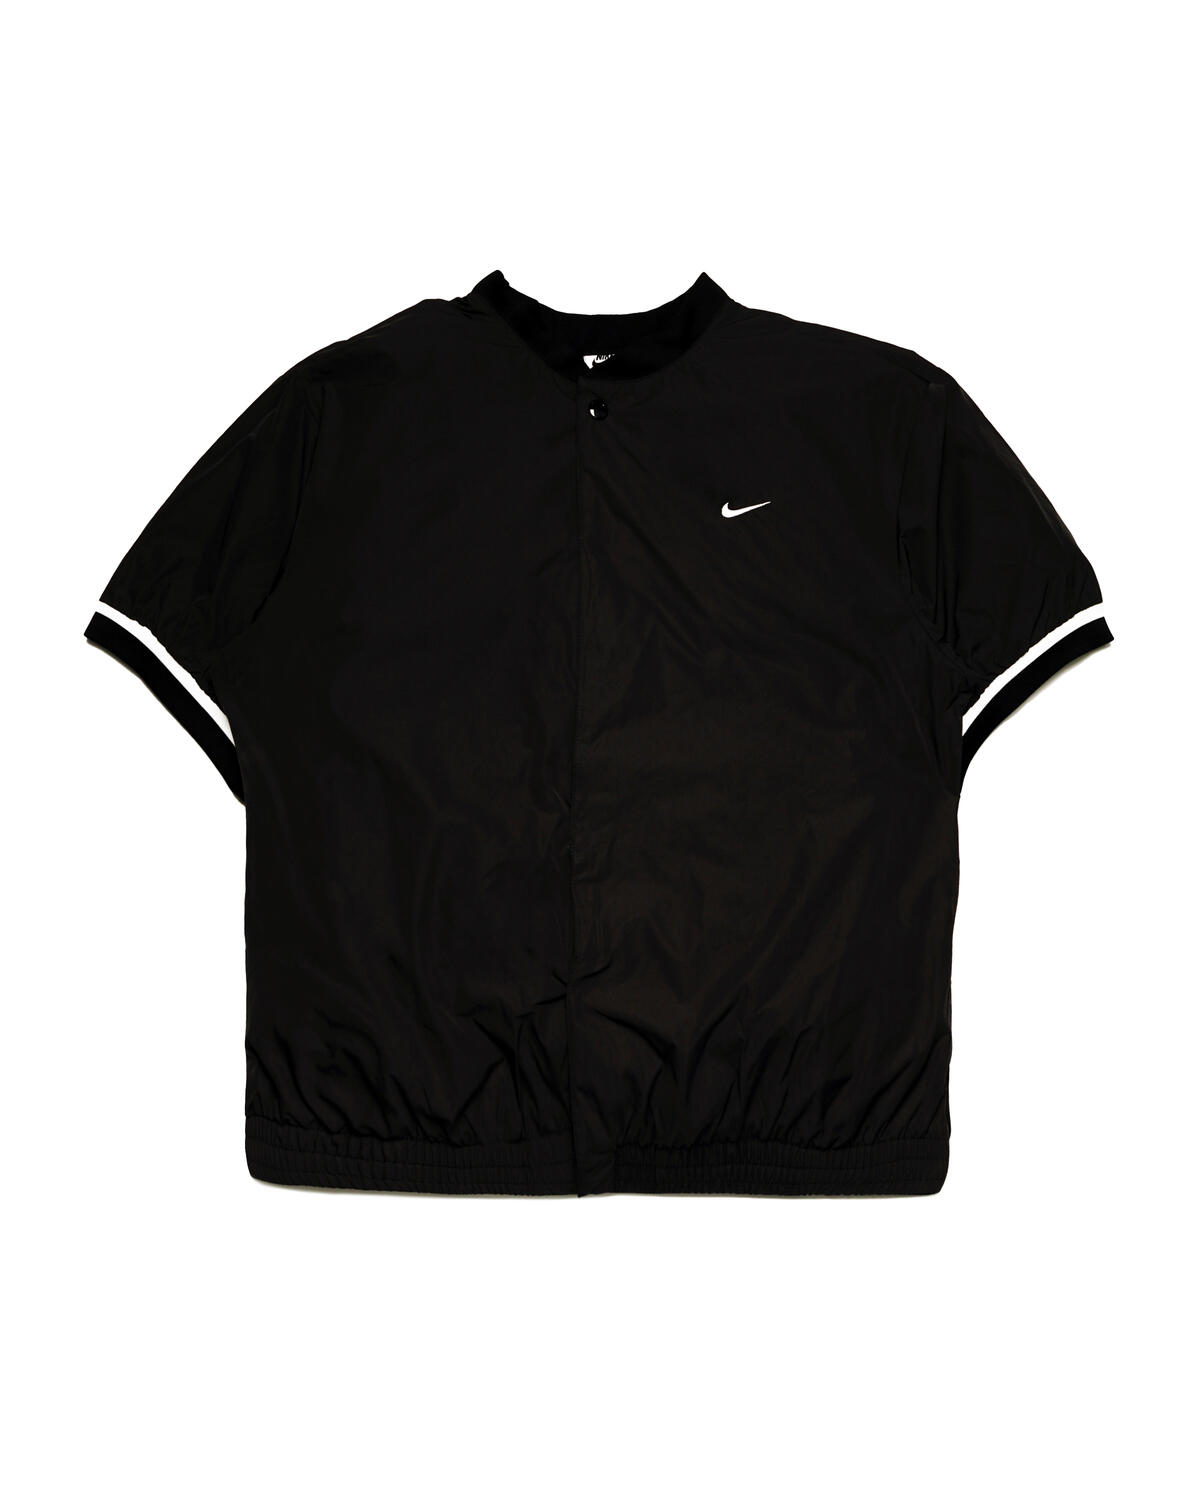 NIKE AUTHENTICS BB WARMUP TOP | DX3342-010 | AFEW STORE